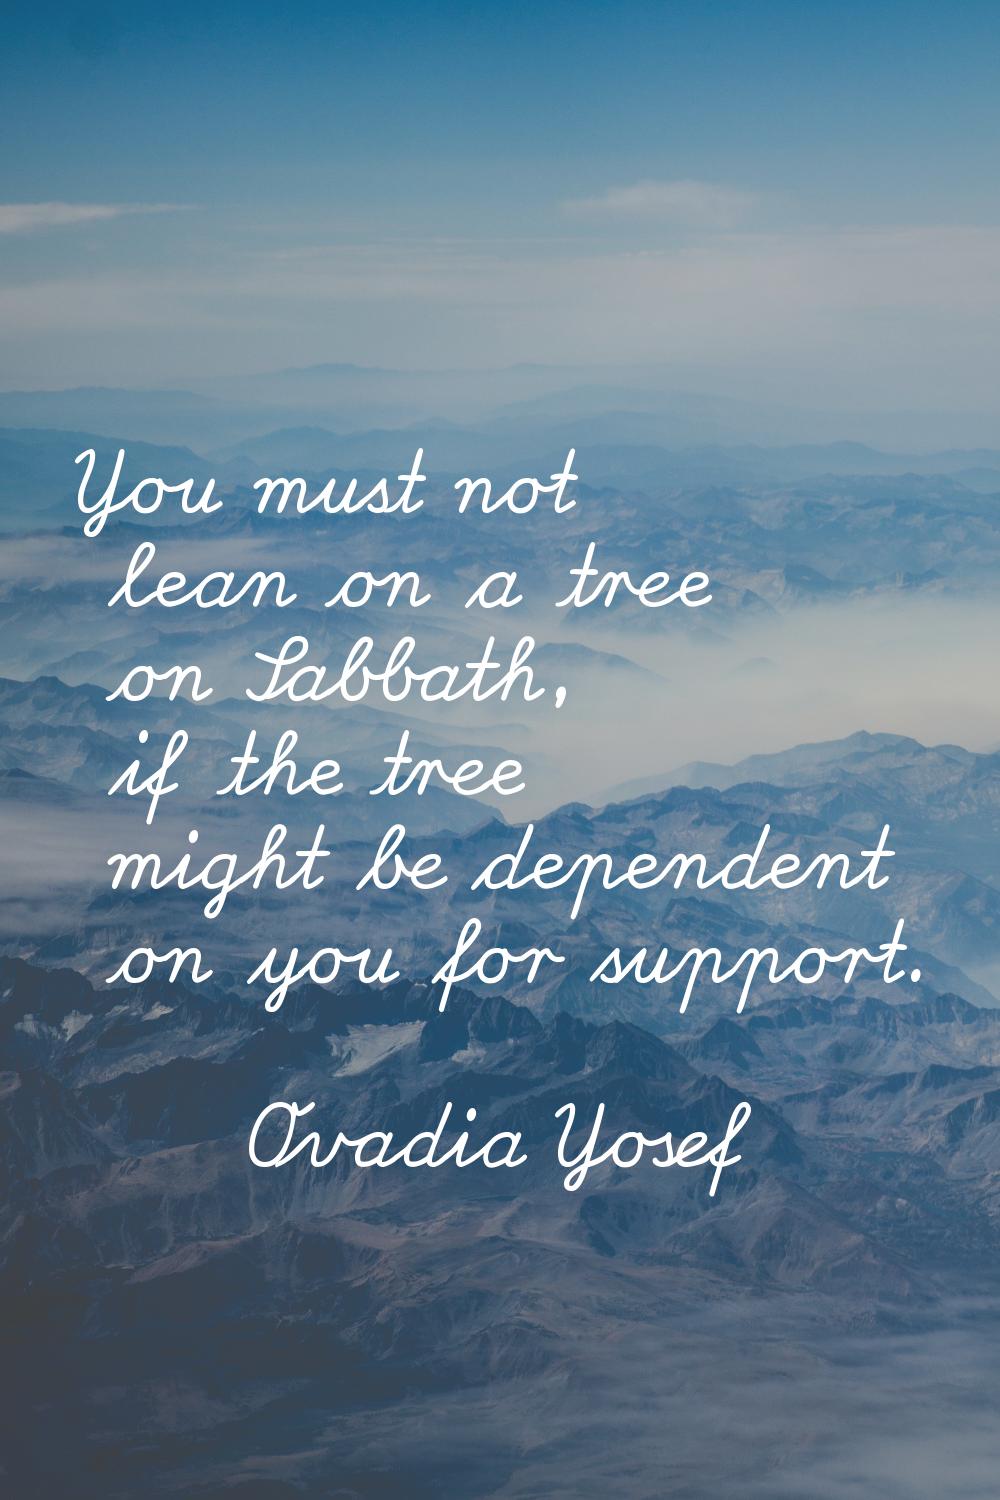 You must not lean on a tree on Sabbath, if the tree might be dependent on you for support.